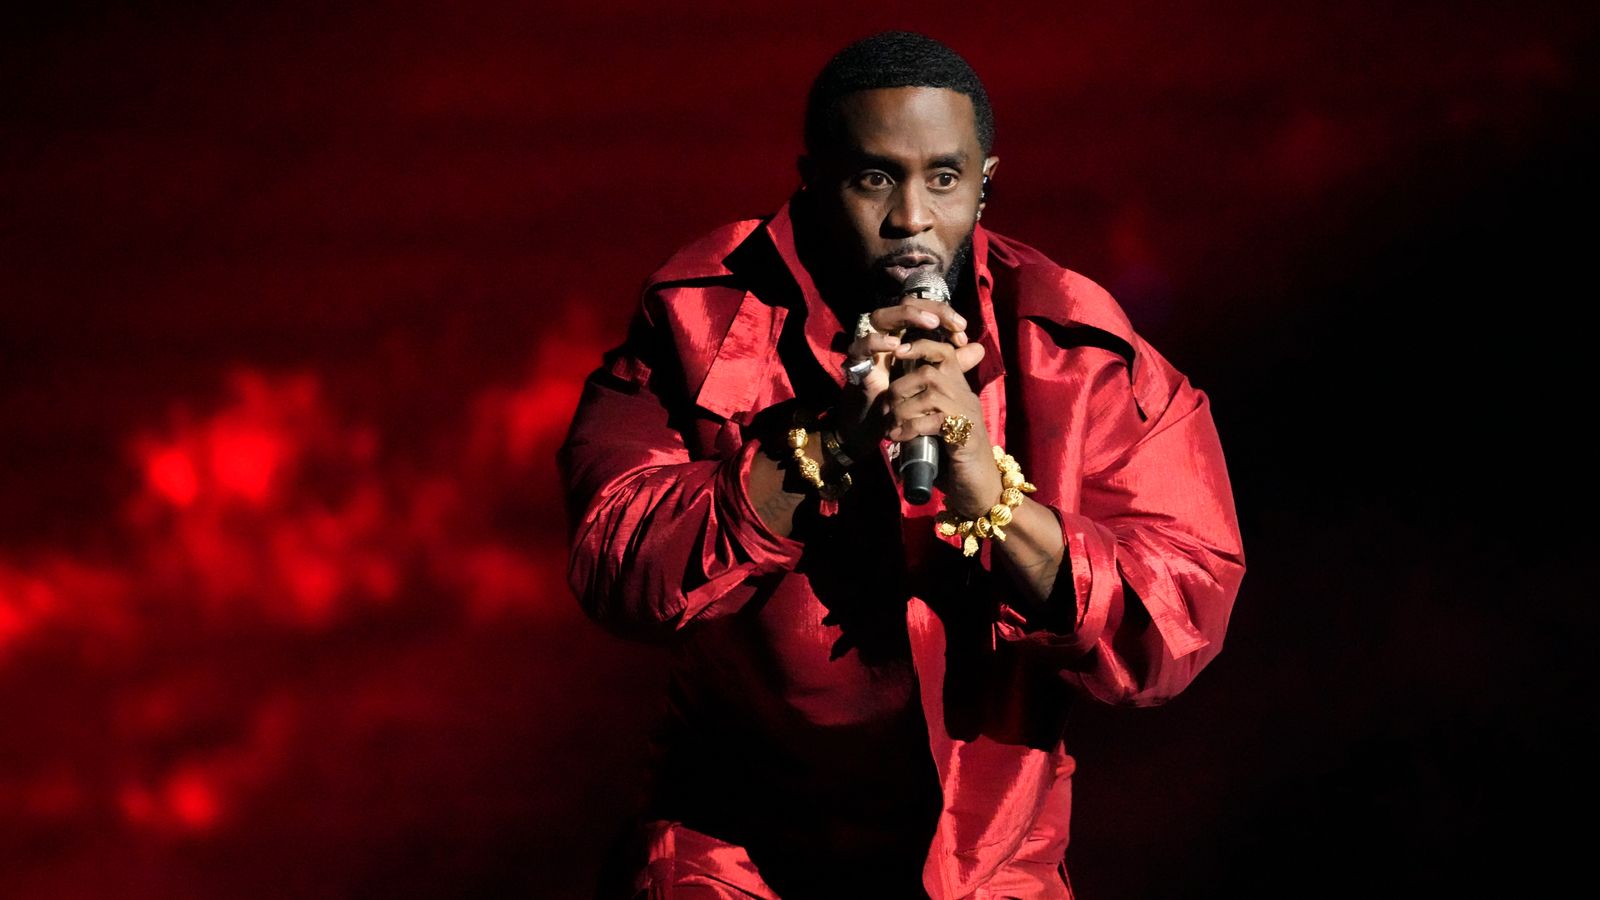 P Diddy: New sexual assault allegations filed against rapper Sean Combs